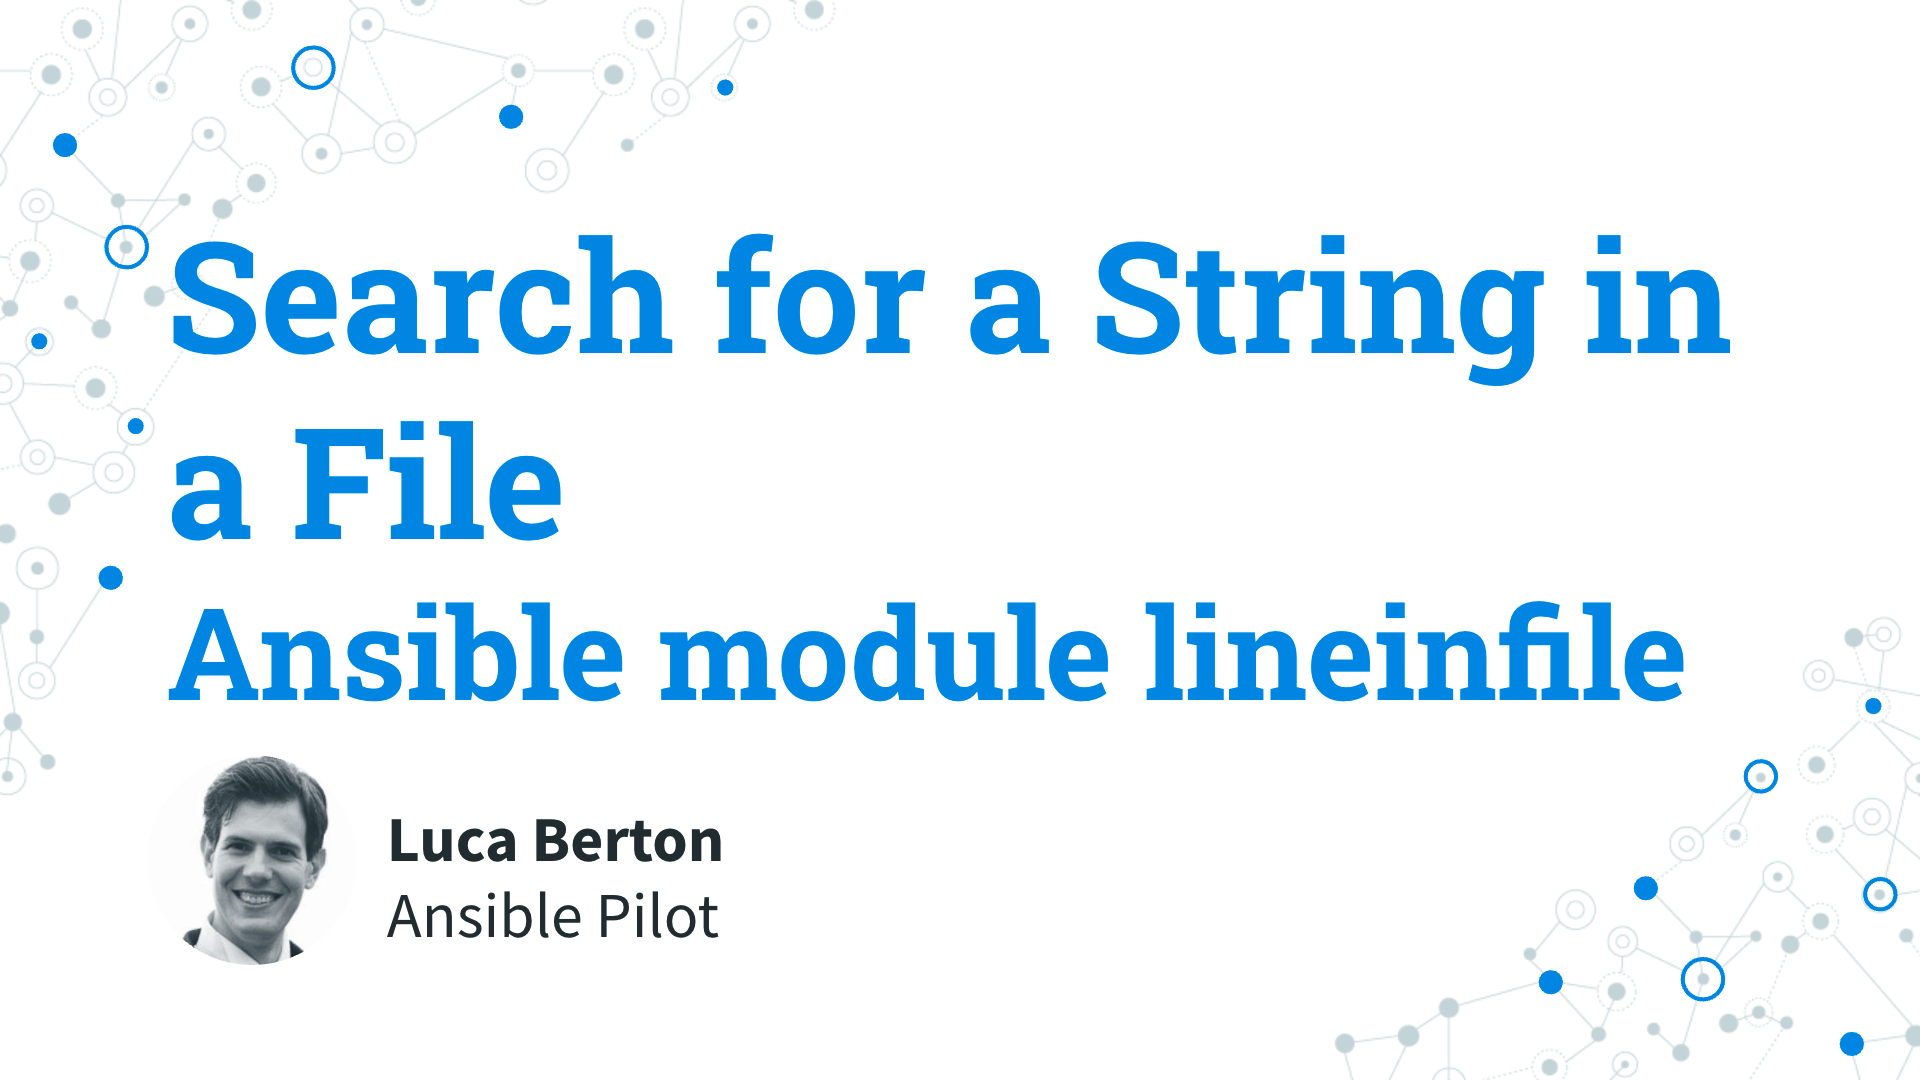 Search for a String in a File - Ansible module lineinfile